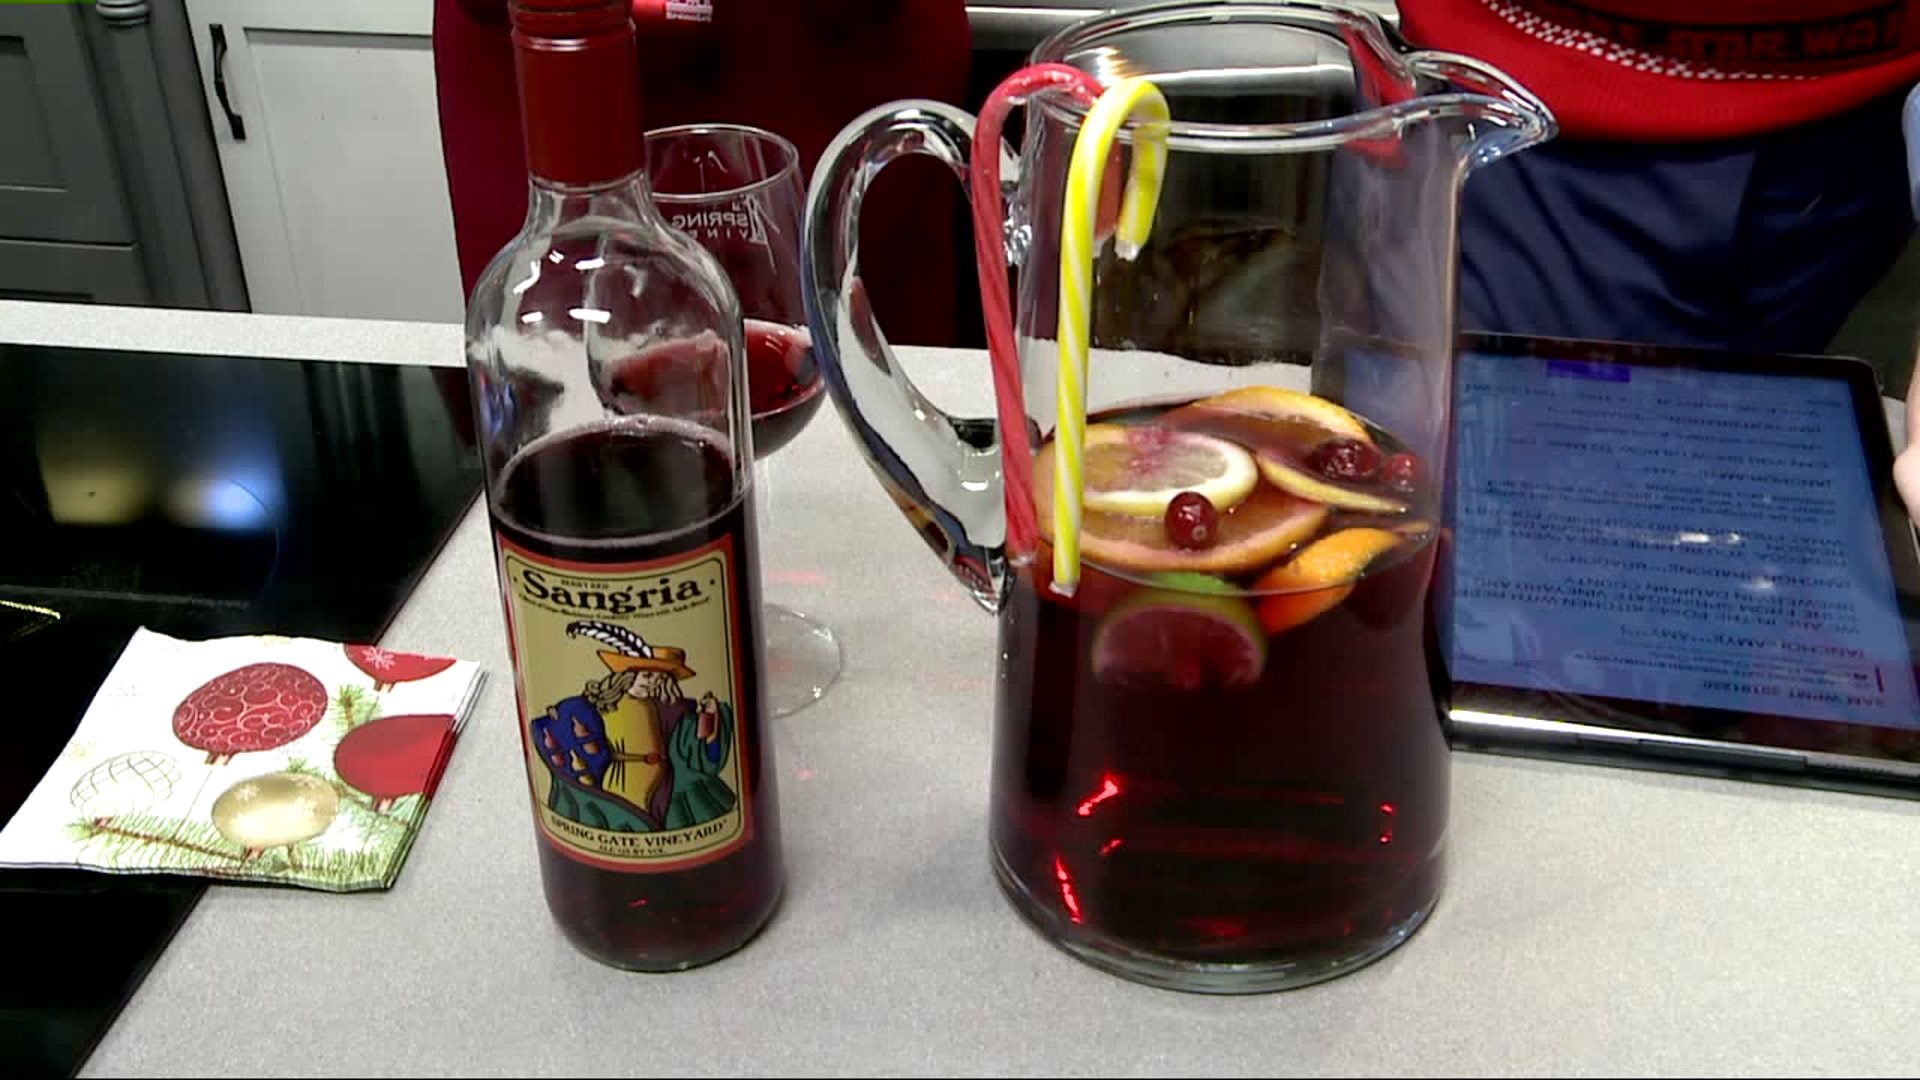 SpringGate Vineyard & Brewery celebrates National Sangria Day in the FOX43 Kitchen